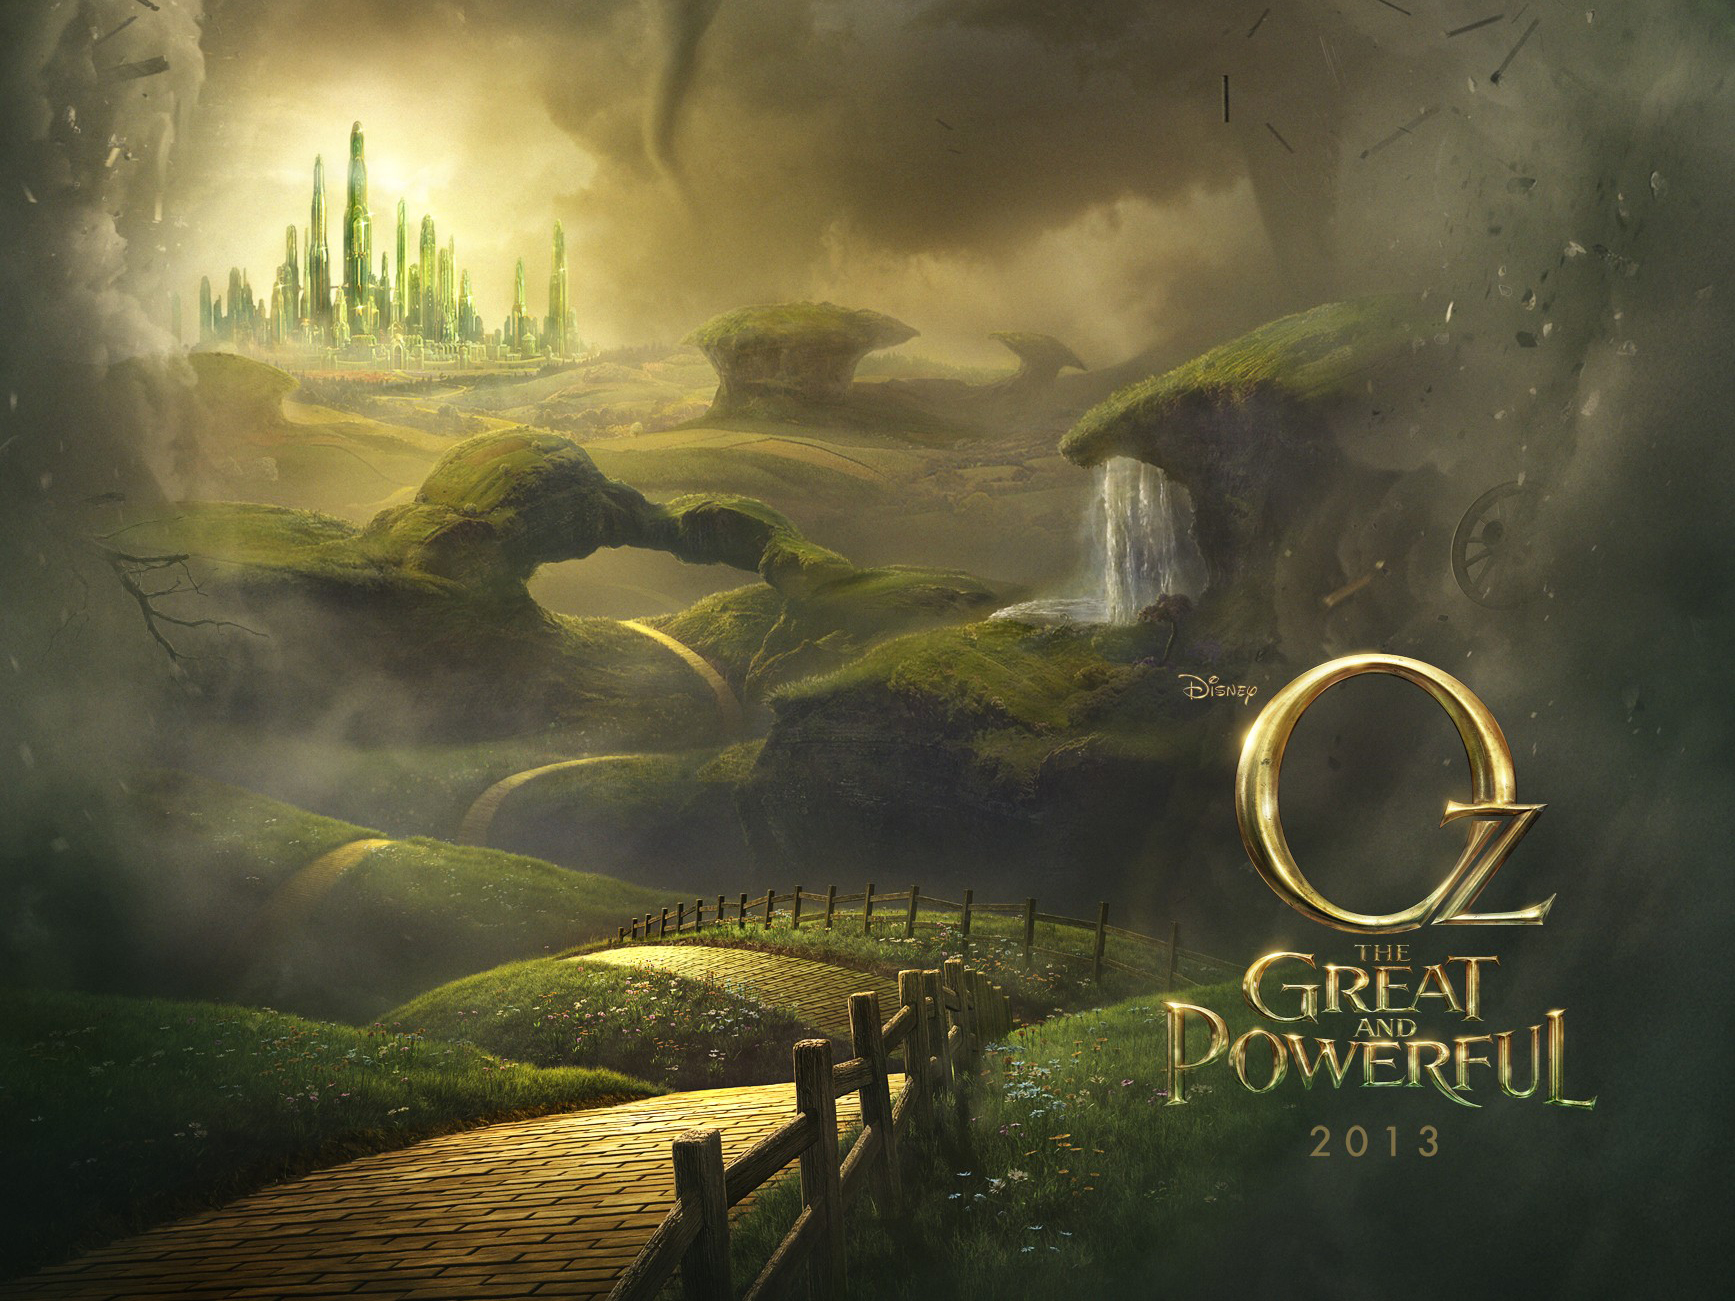 Oz The Great And Powerful - HD Wallpaper 